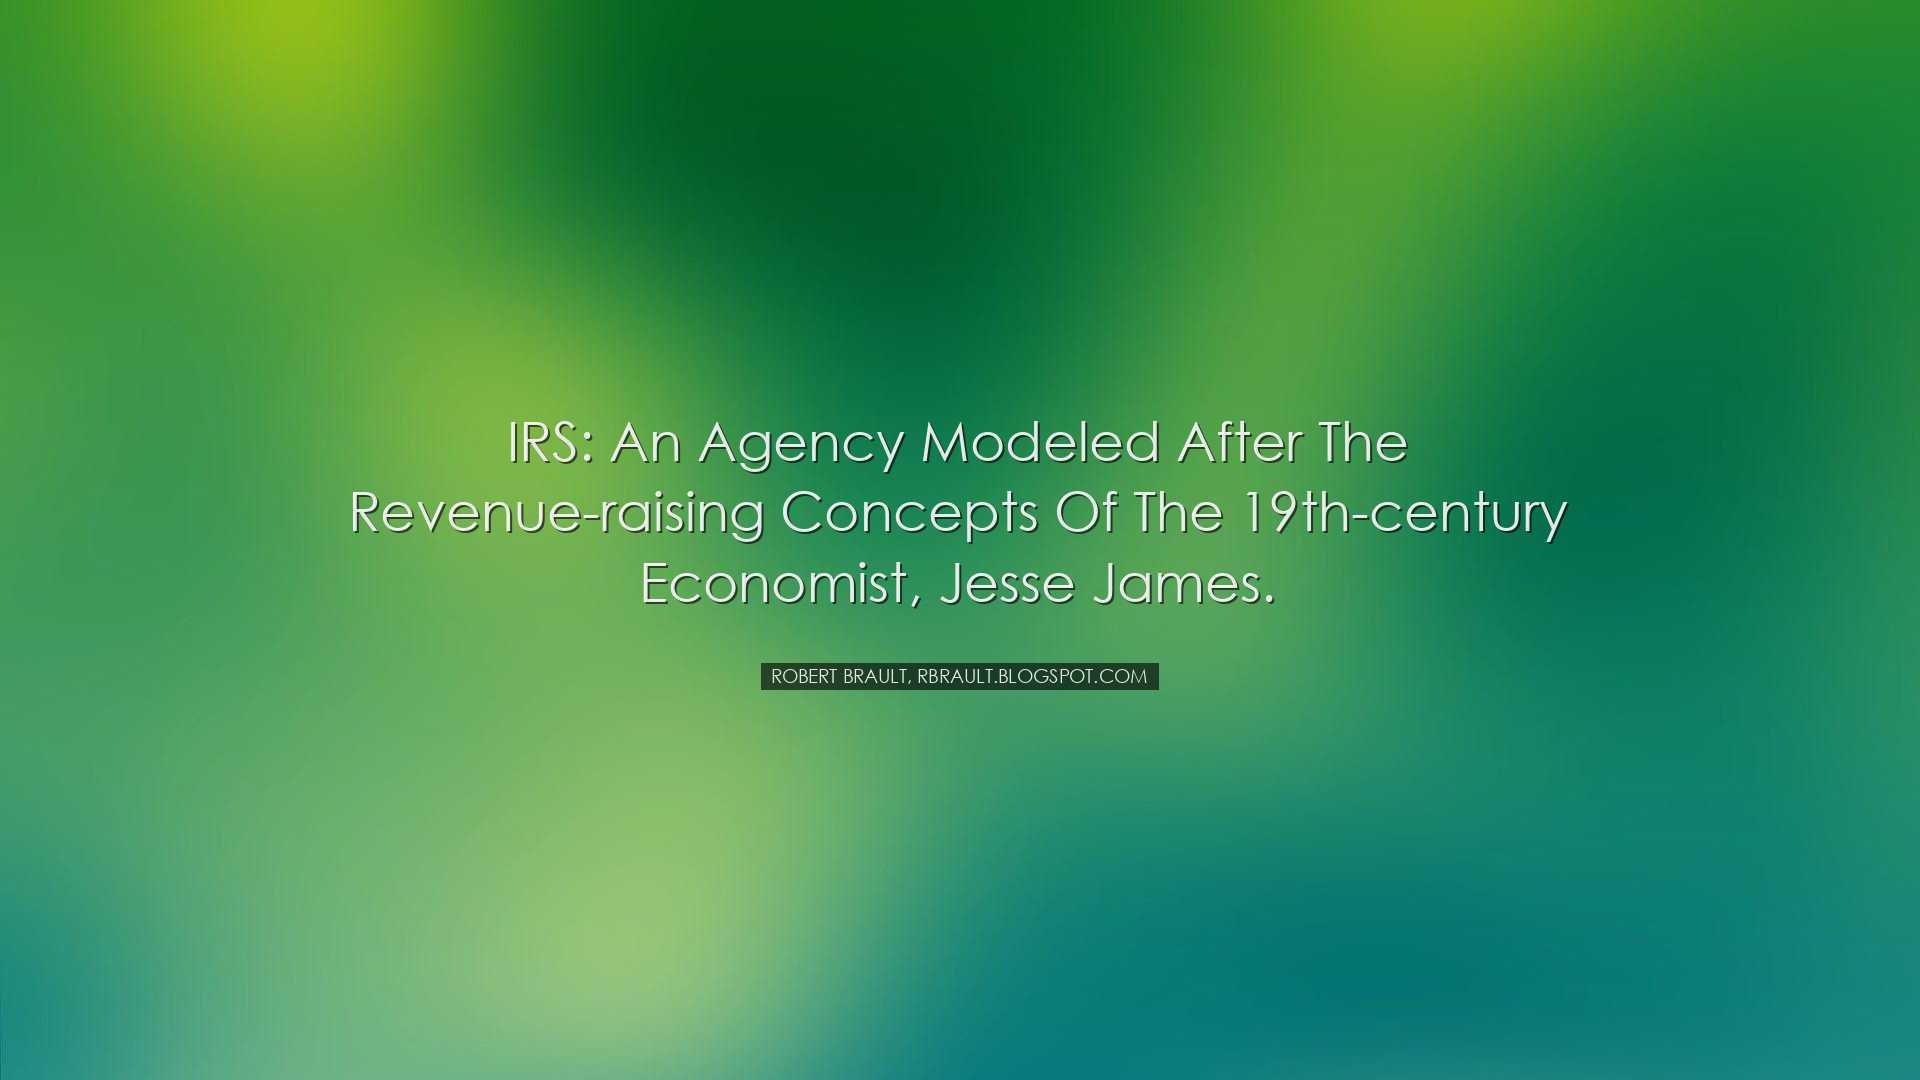 IRS: an agency modeled after the revenue-raising concepts of the 1